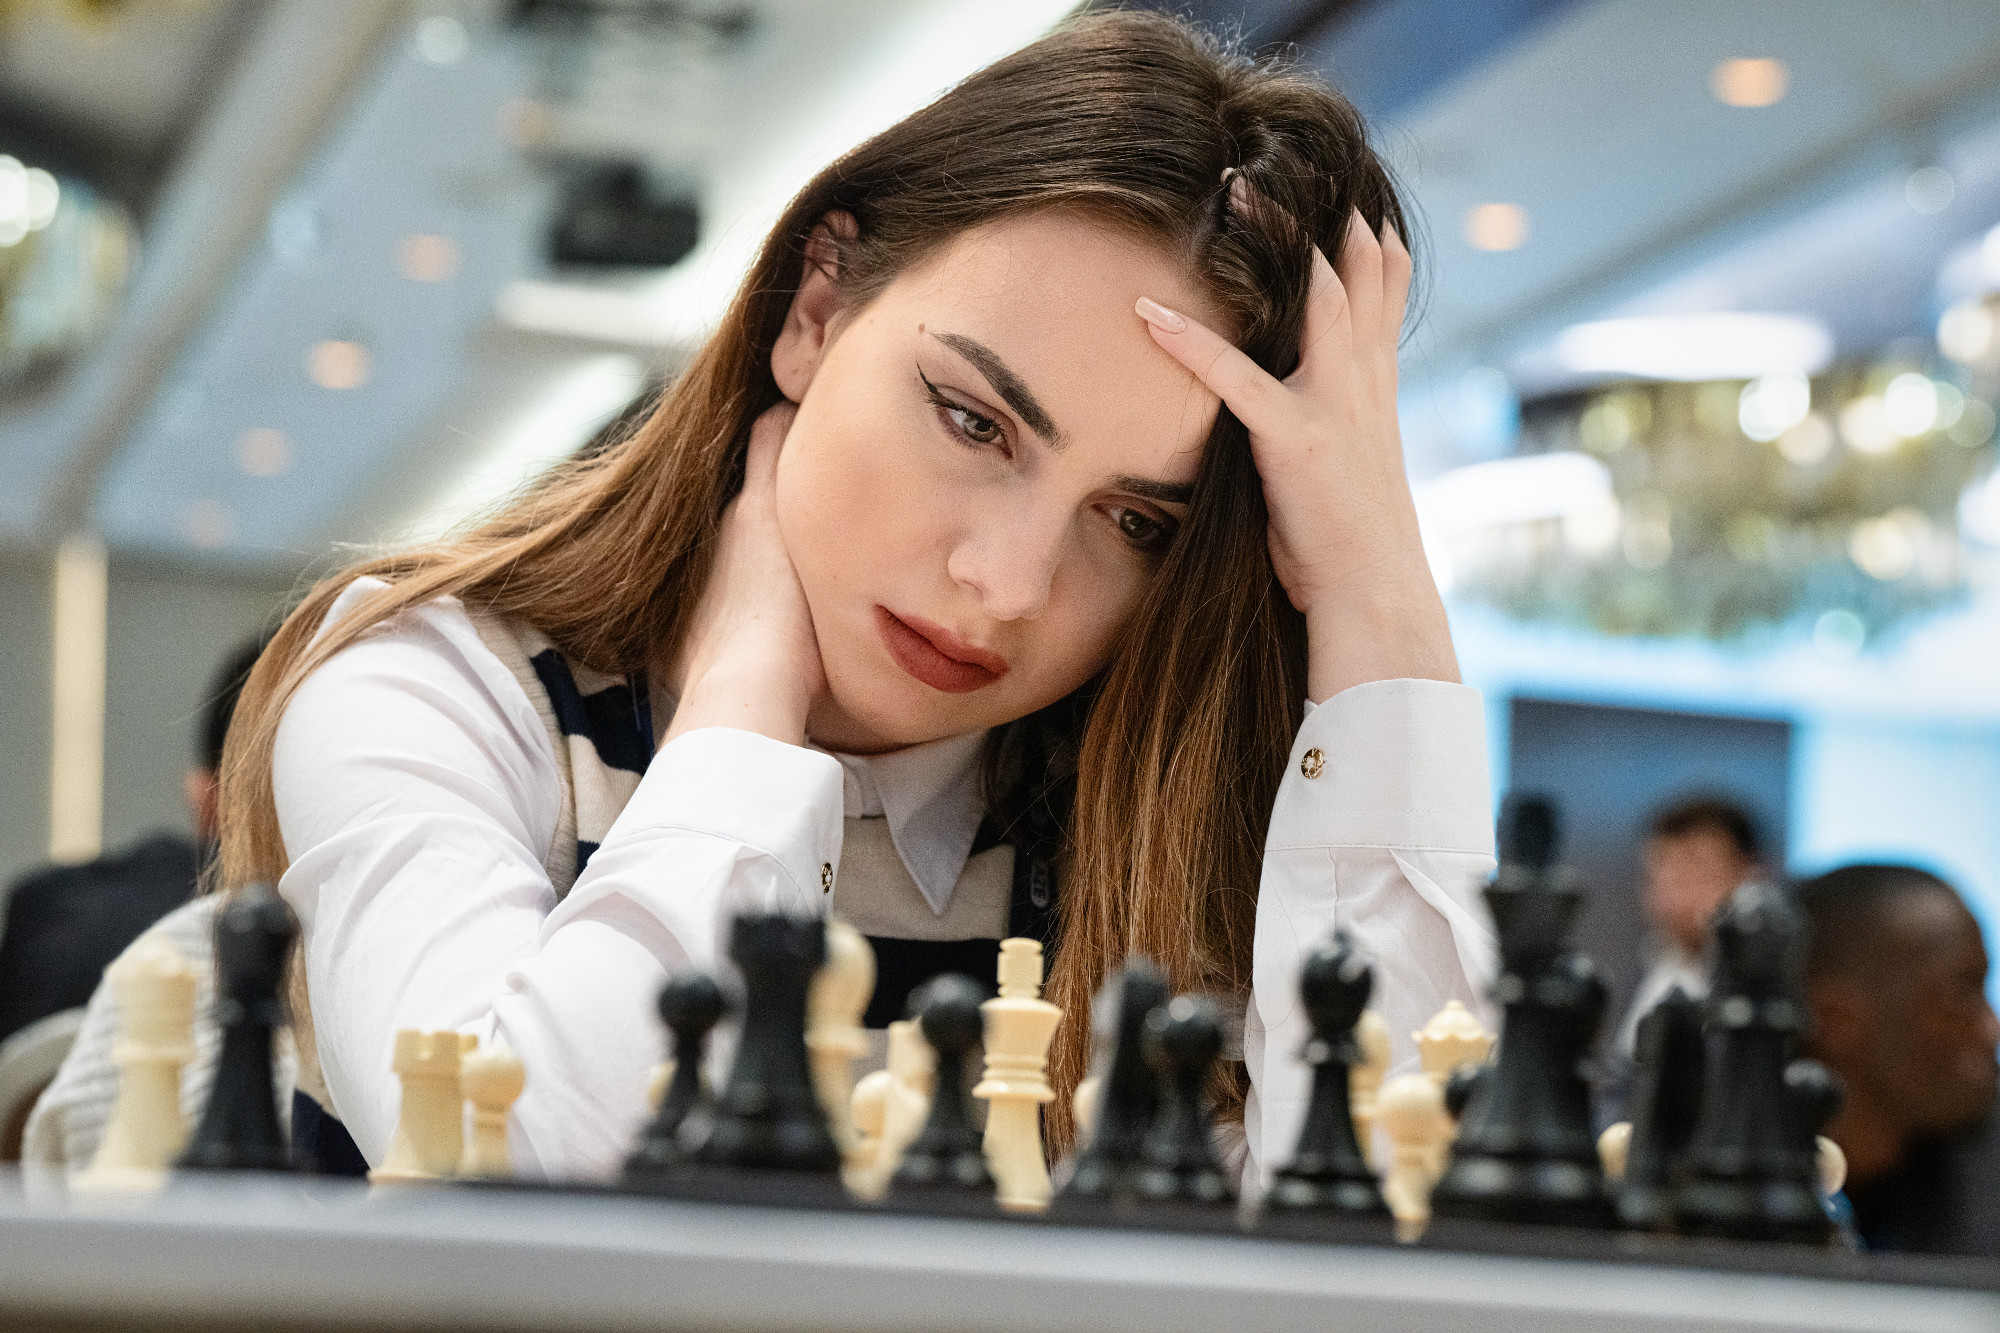 Chess World Cup: Carlsen, Pragg set the stage for an epic